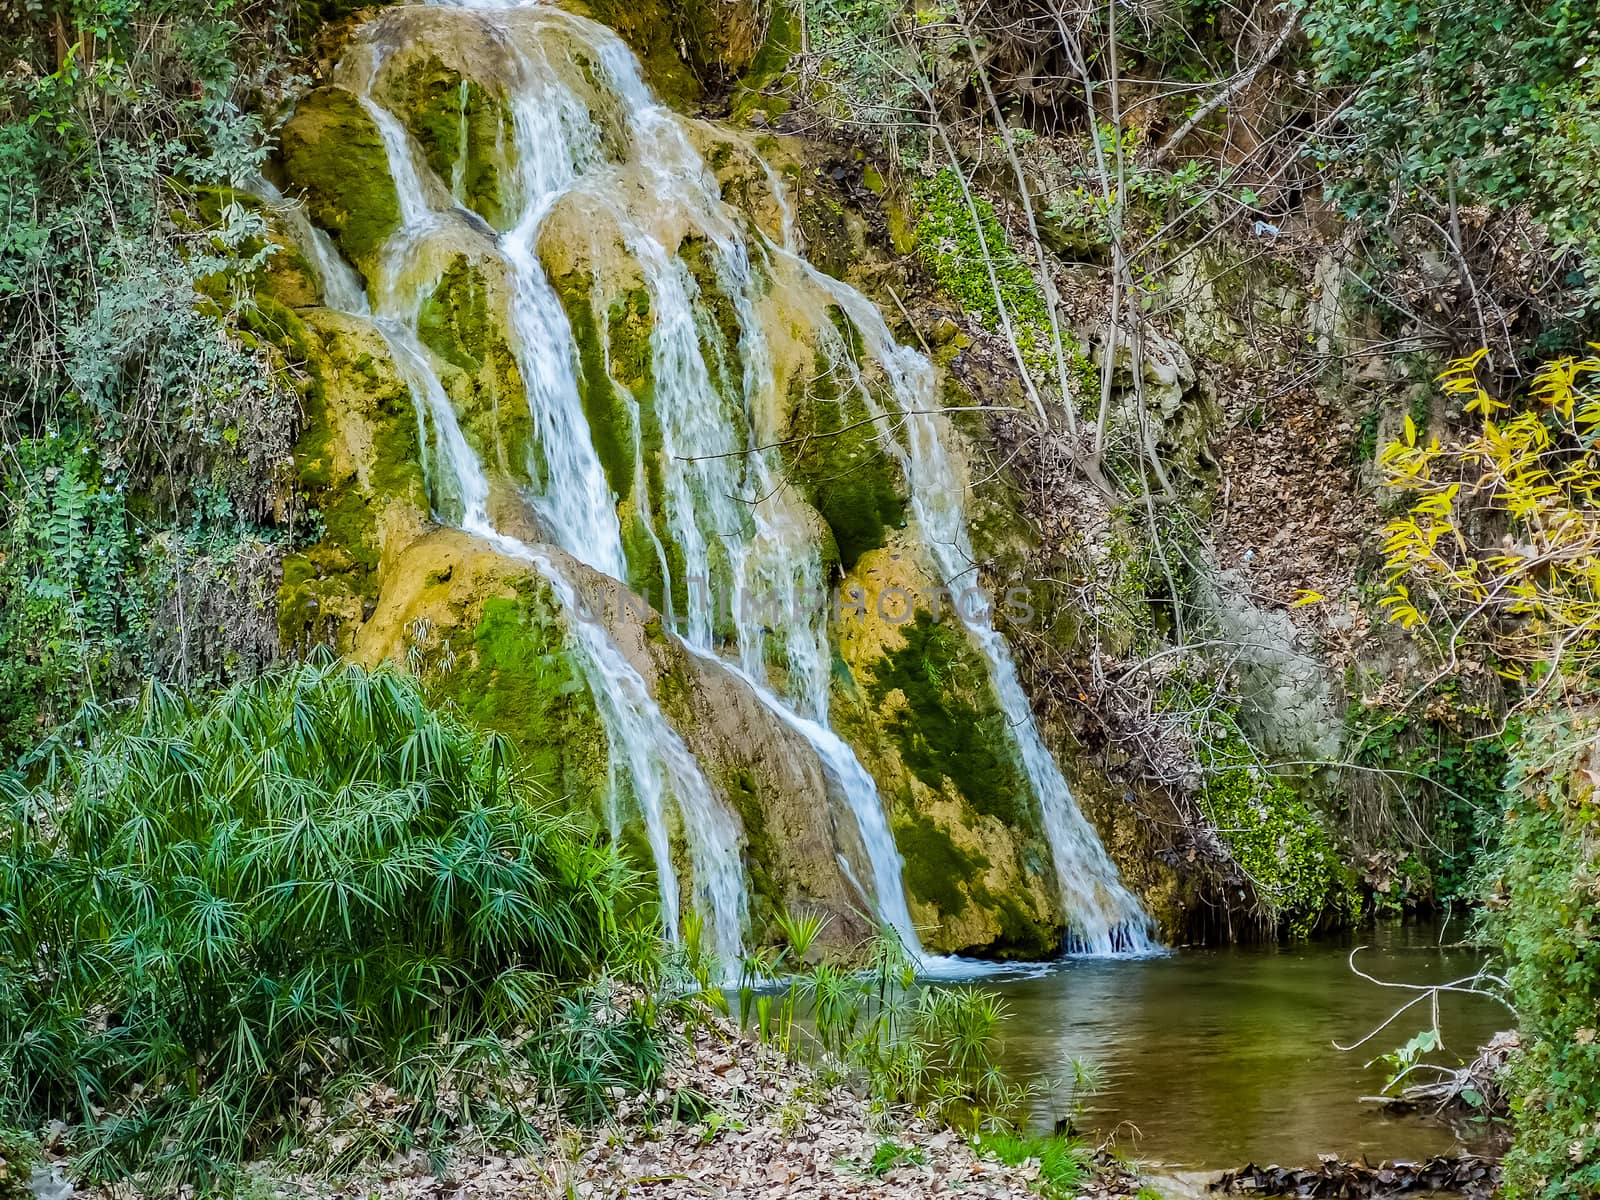 View of the main waterfall of La Floresta in Viver